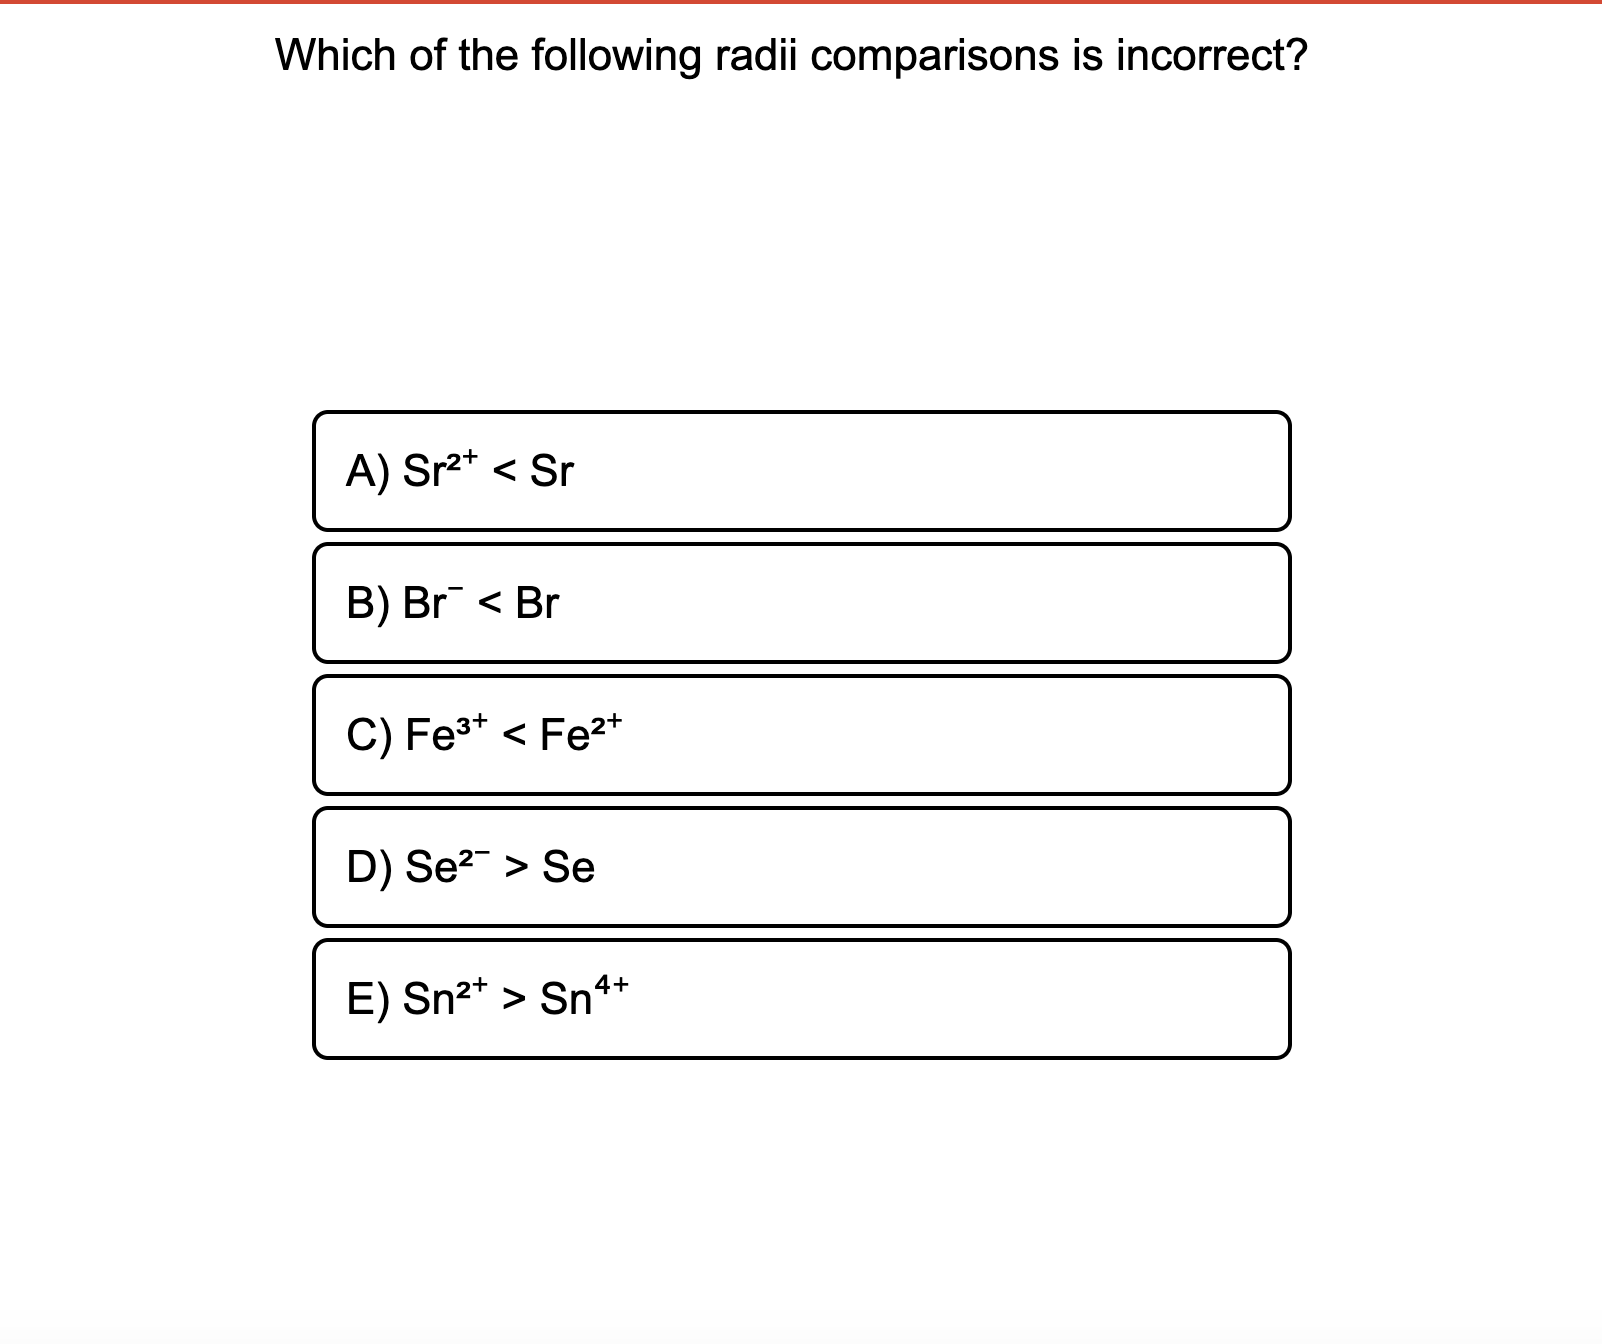 Which of the following radii comparisons is incorrect?
